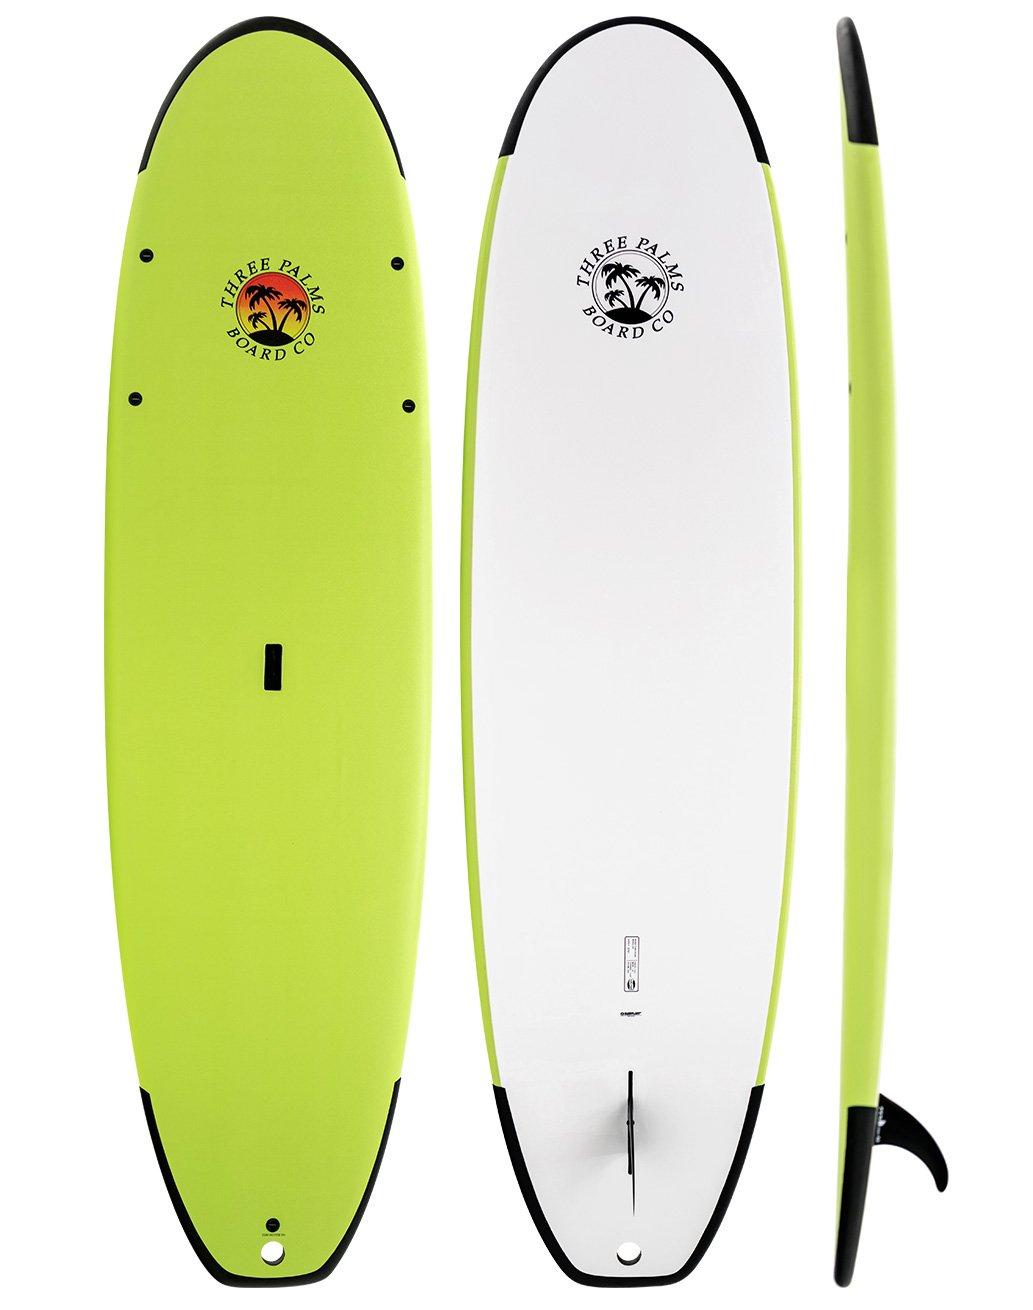 3 Palms Board Co Package (Board & Paddle)